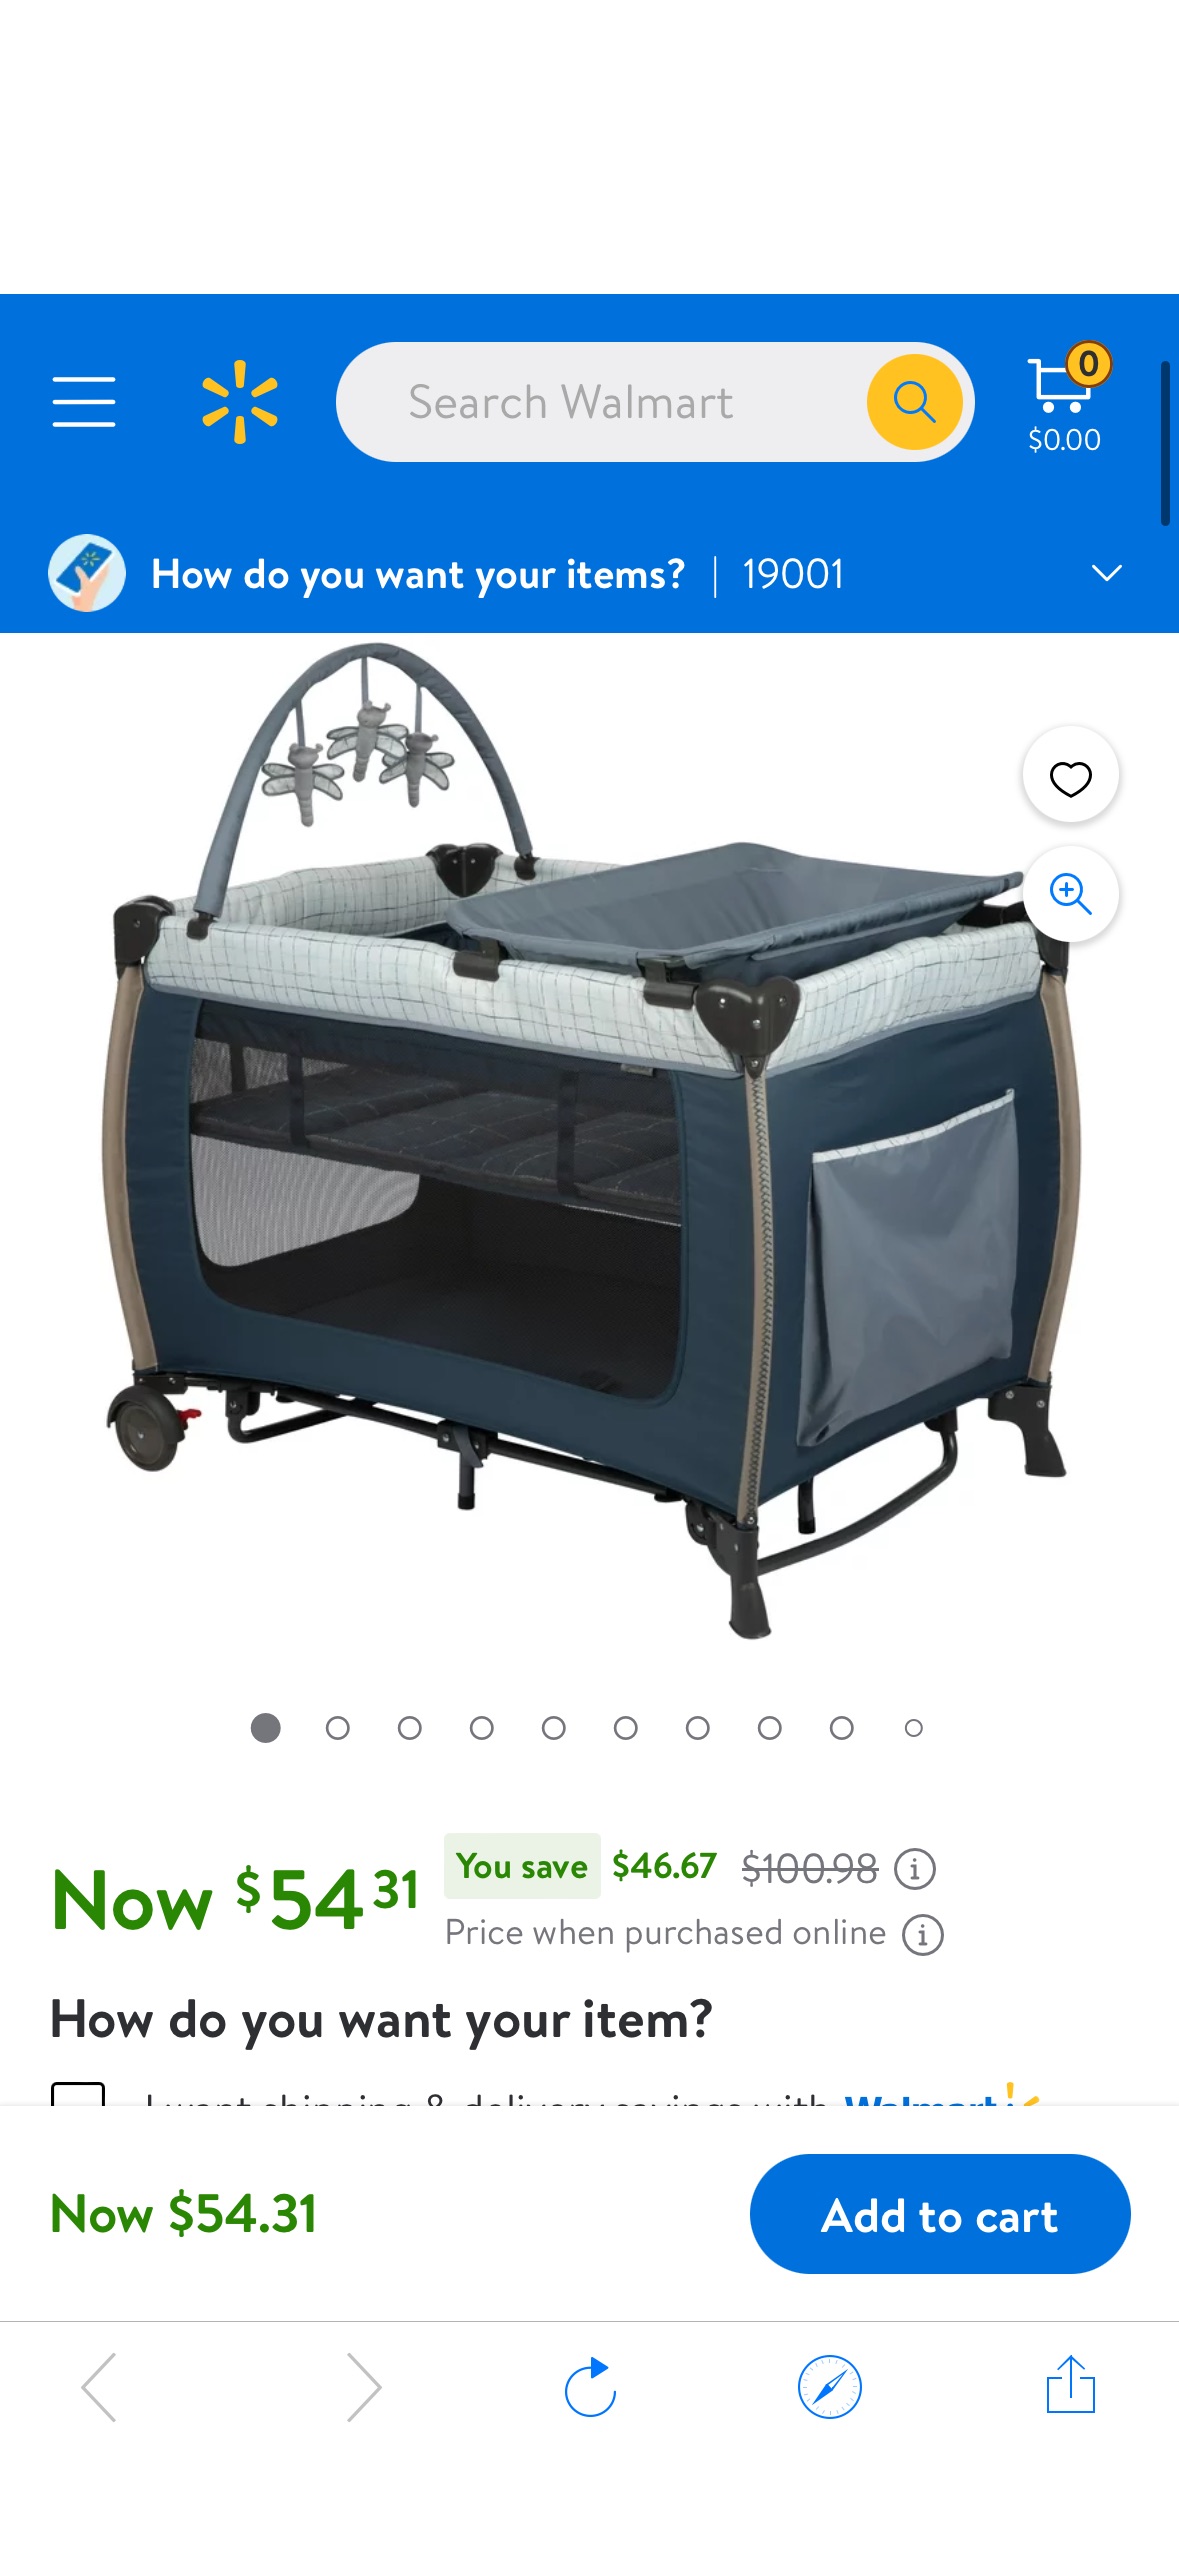 Monbebe Willow Rocking Play Yard with Full Size Bassinet, Plaid - Walmart.com